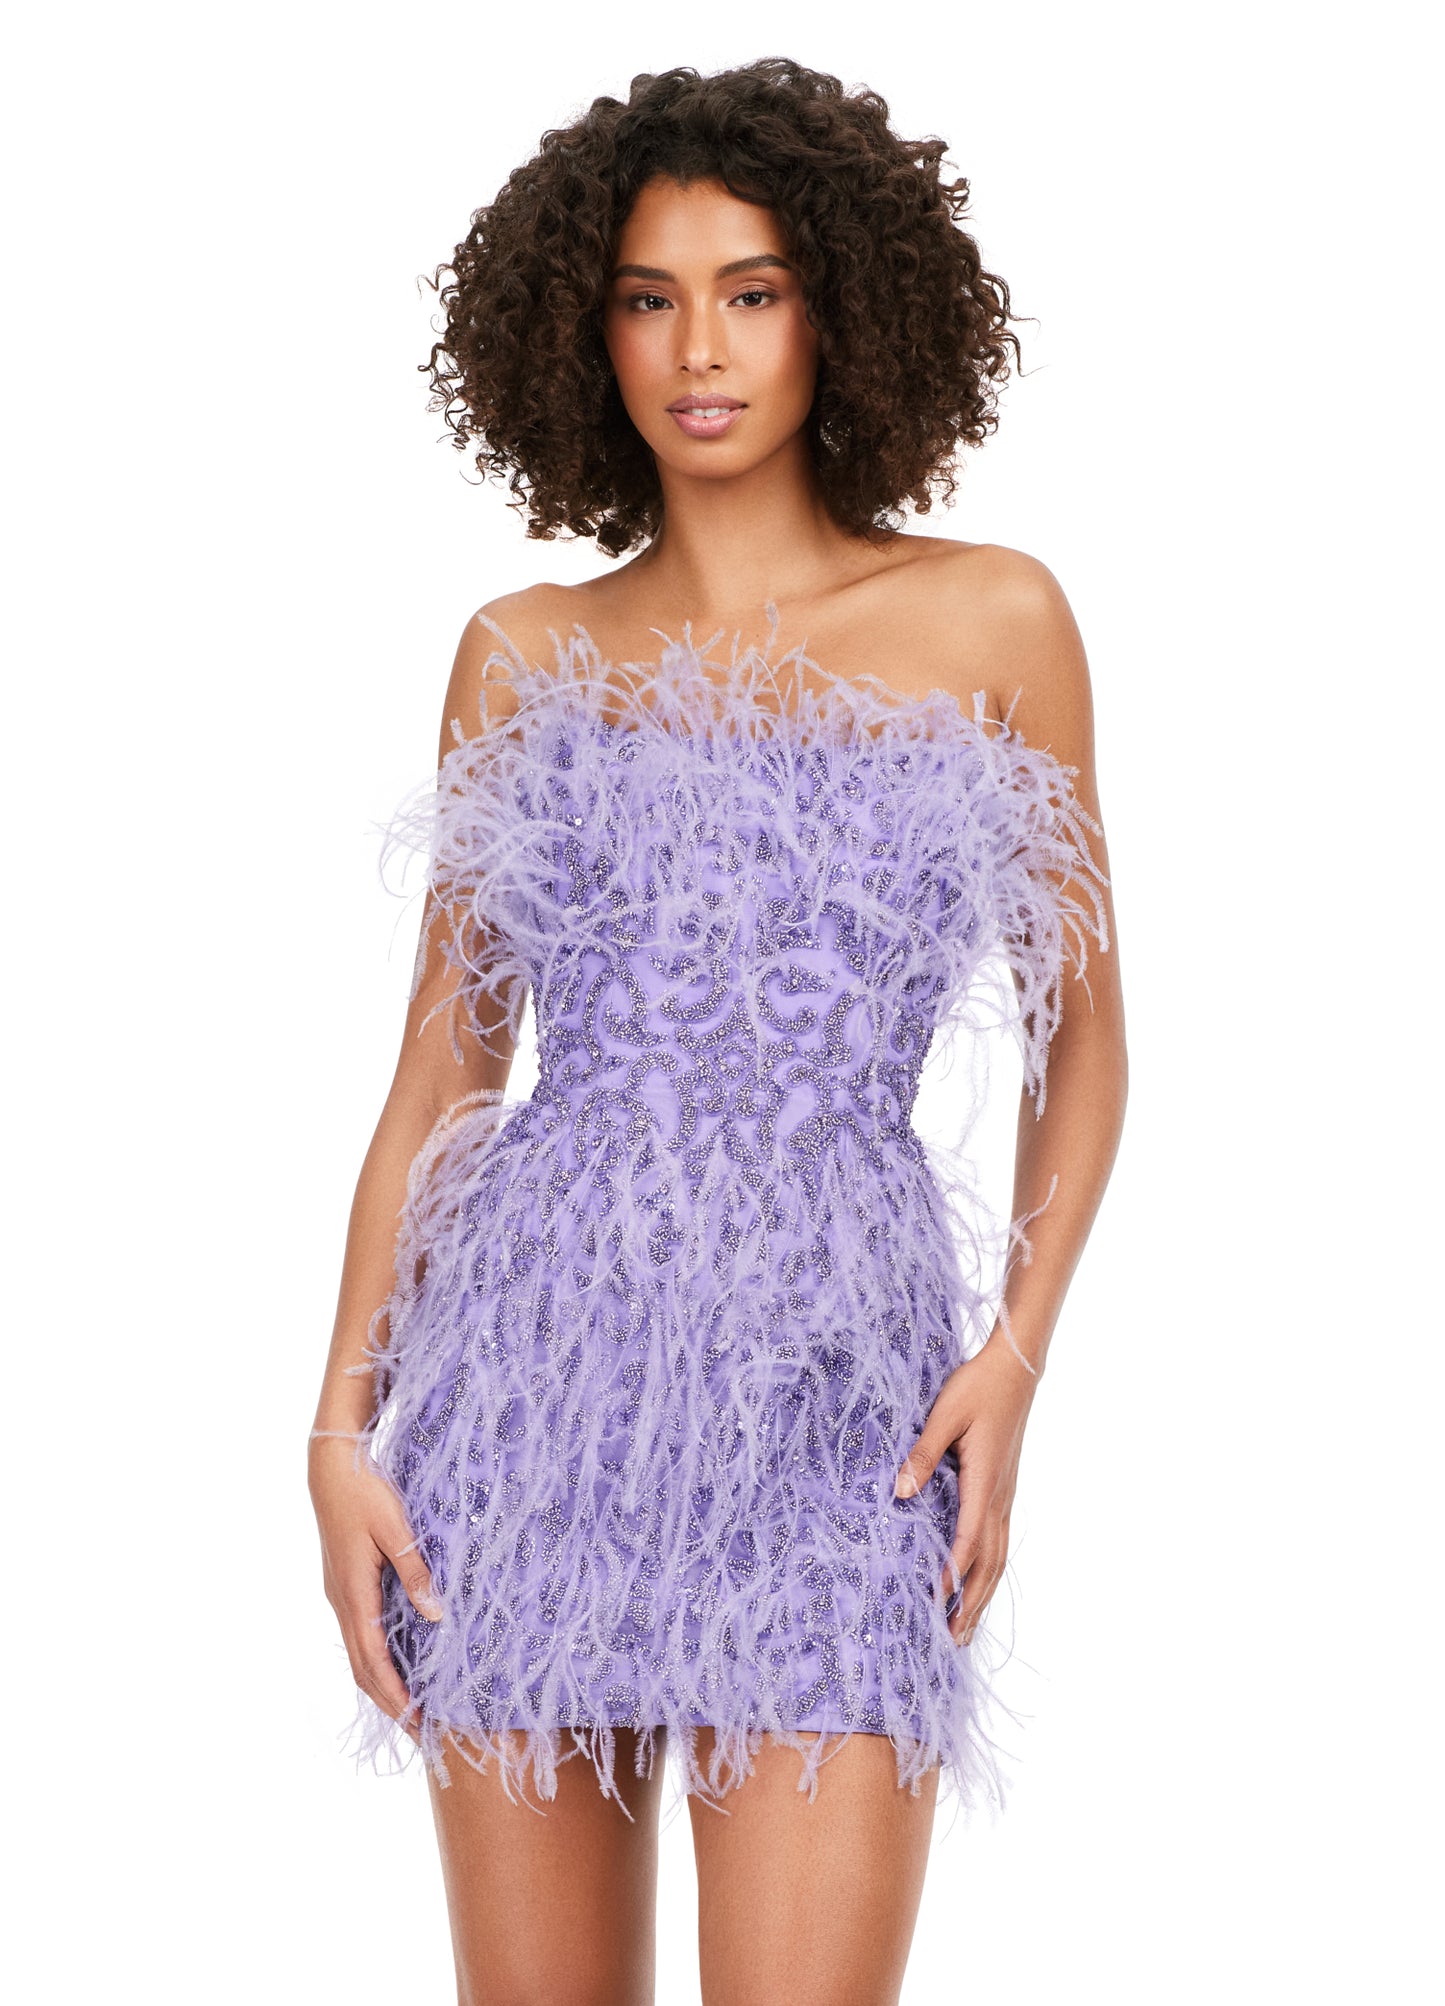 Ashley Lauren 4615 Fully Beaded Strapless Sheer Embellished Bodice Feather Detailing Cocktail Homecoming Dress. Feel like a queen in this fully beaded, strapless cocktail dress. With light feathers throughout, this dress will make a statement at any event!